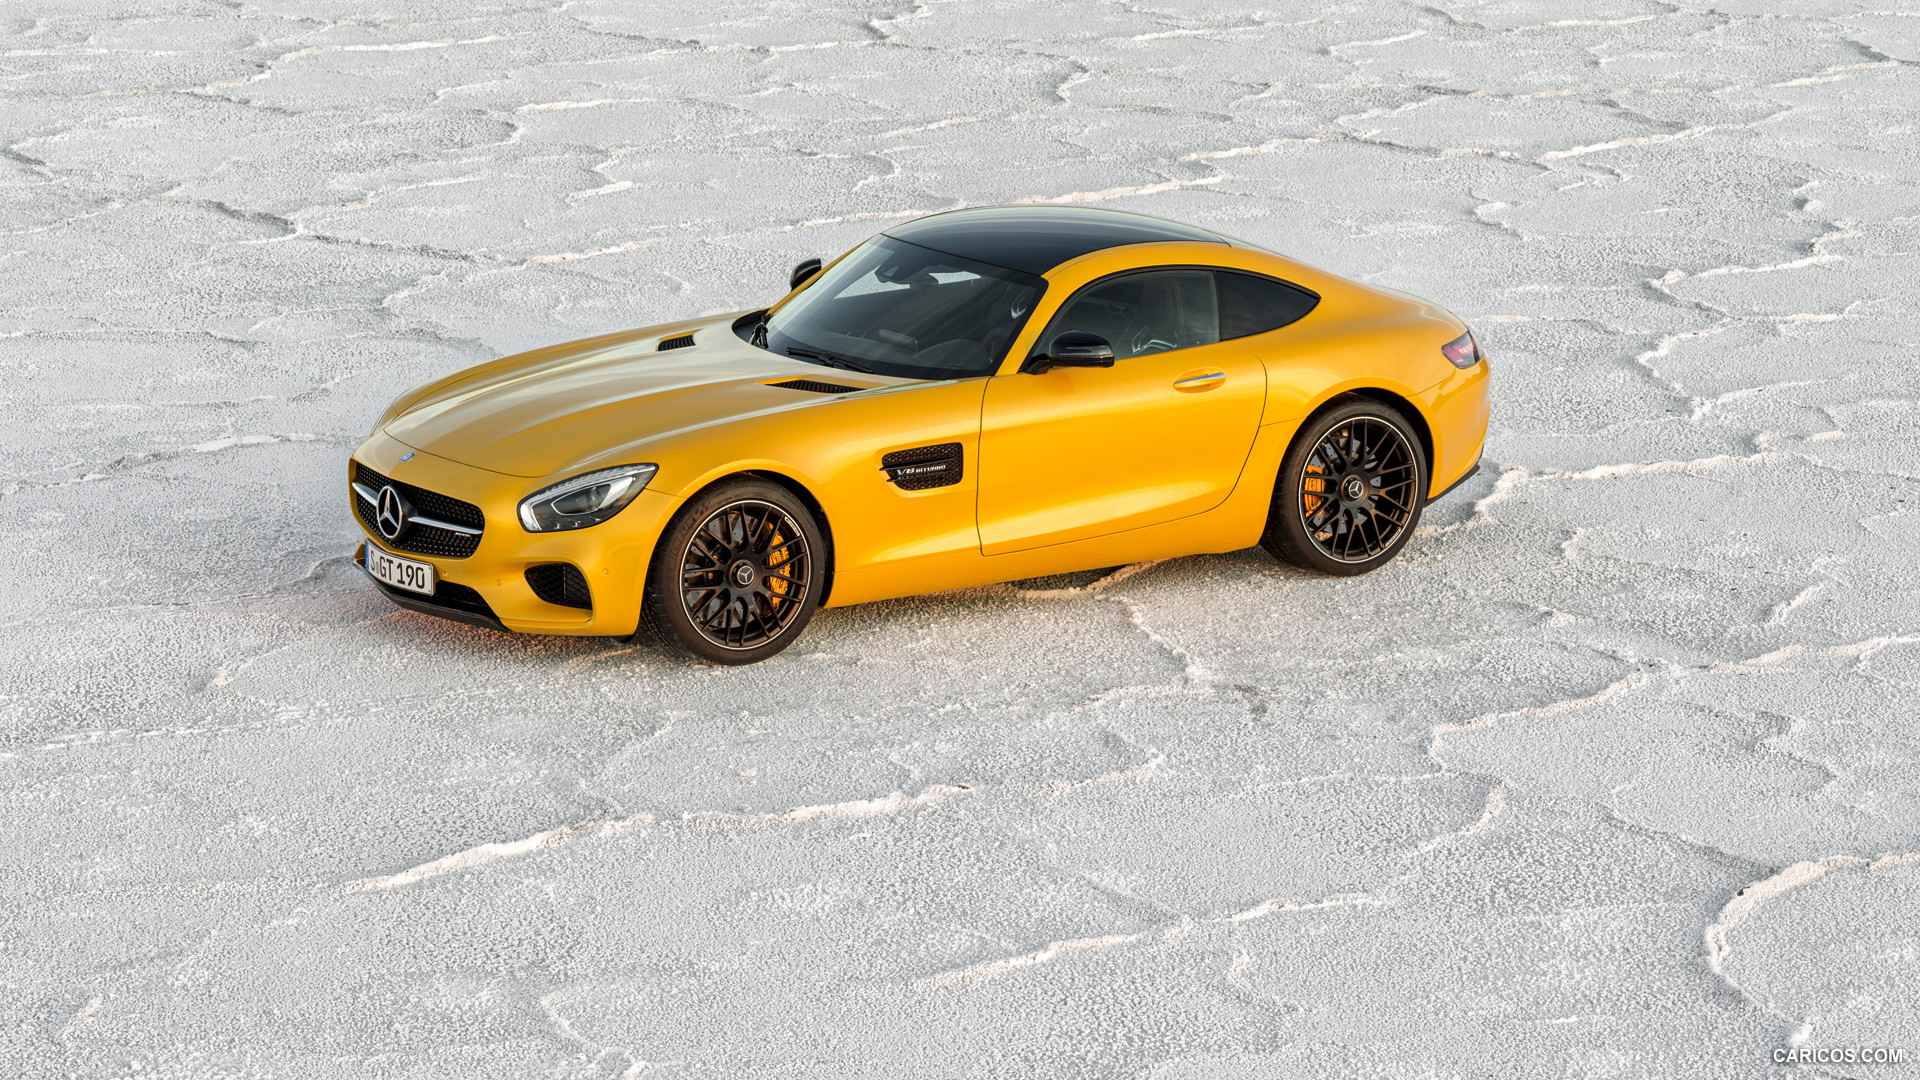 2016 Mercedes-AMG GT (Solarbeam) - Side, #70 of 190